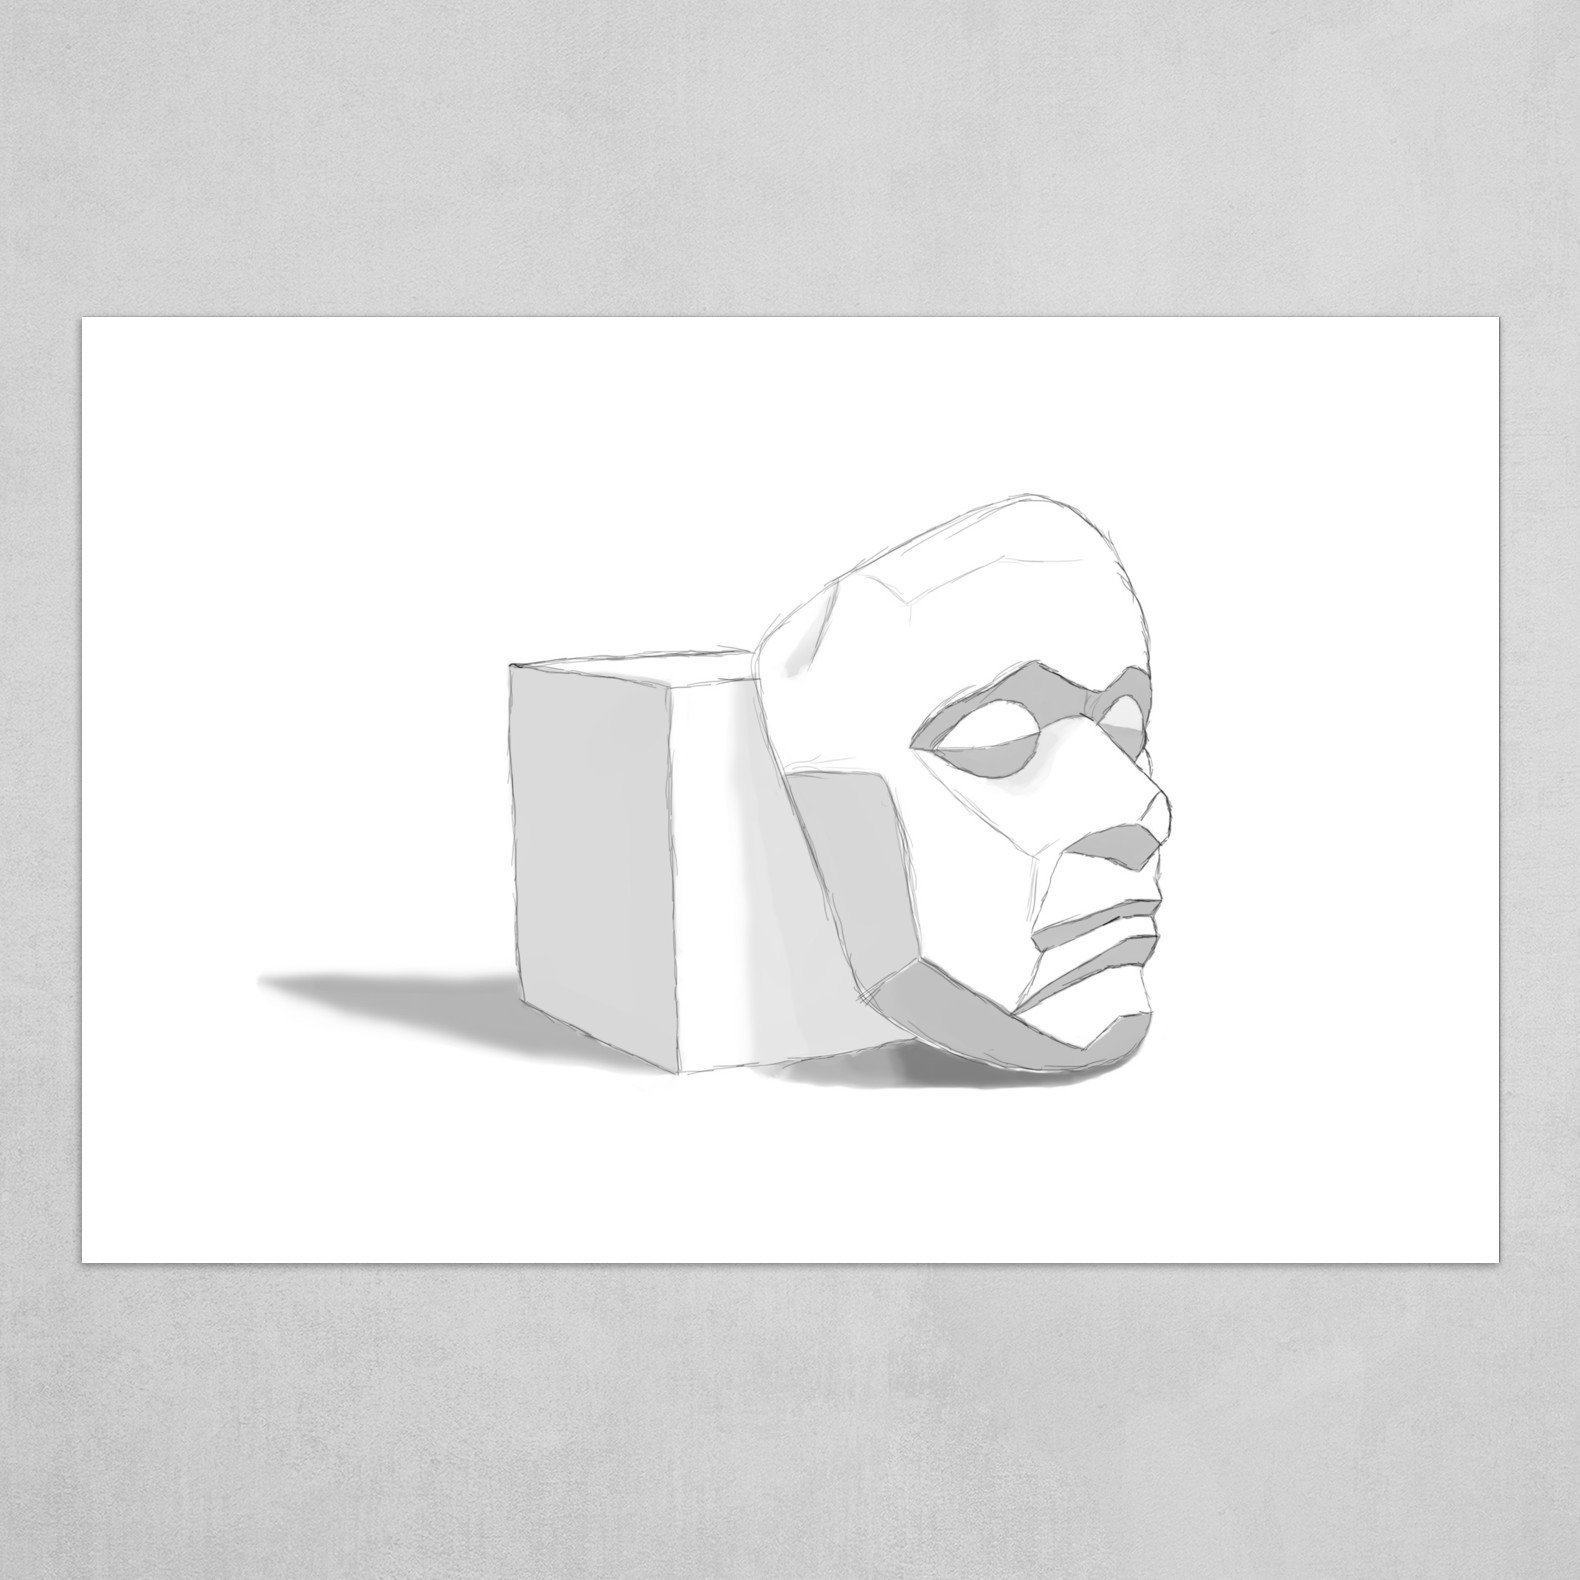 Simple cube and face